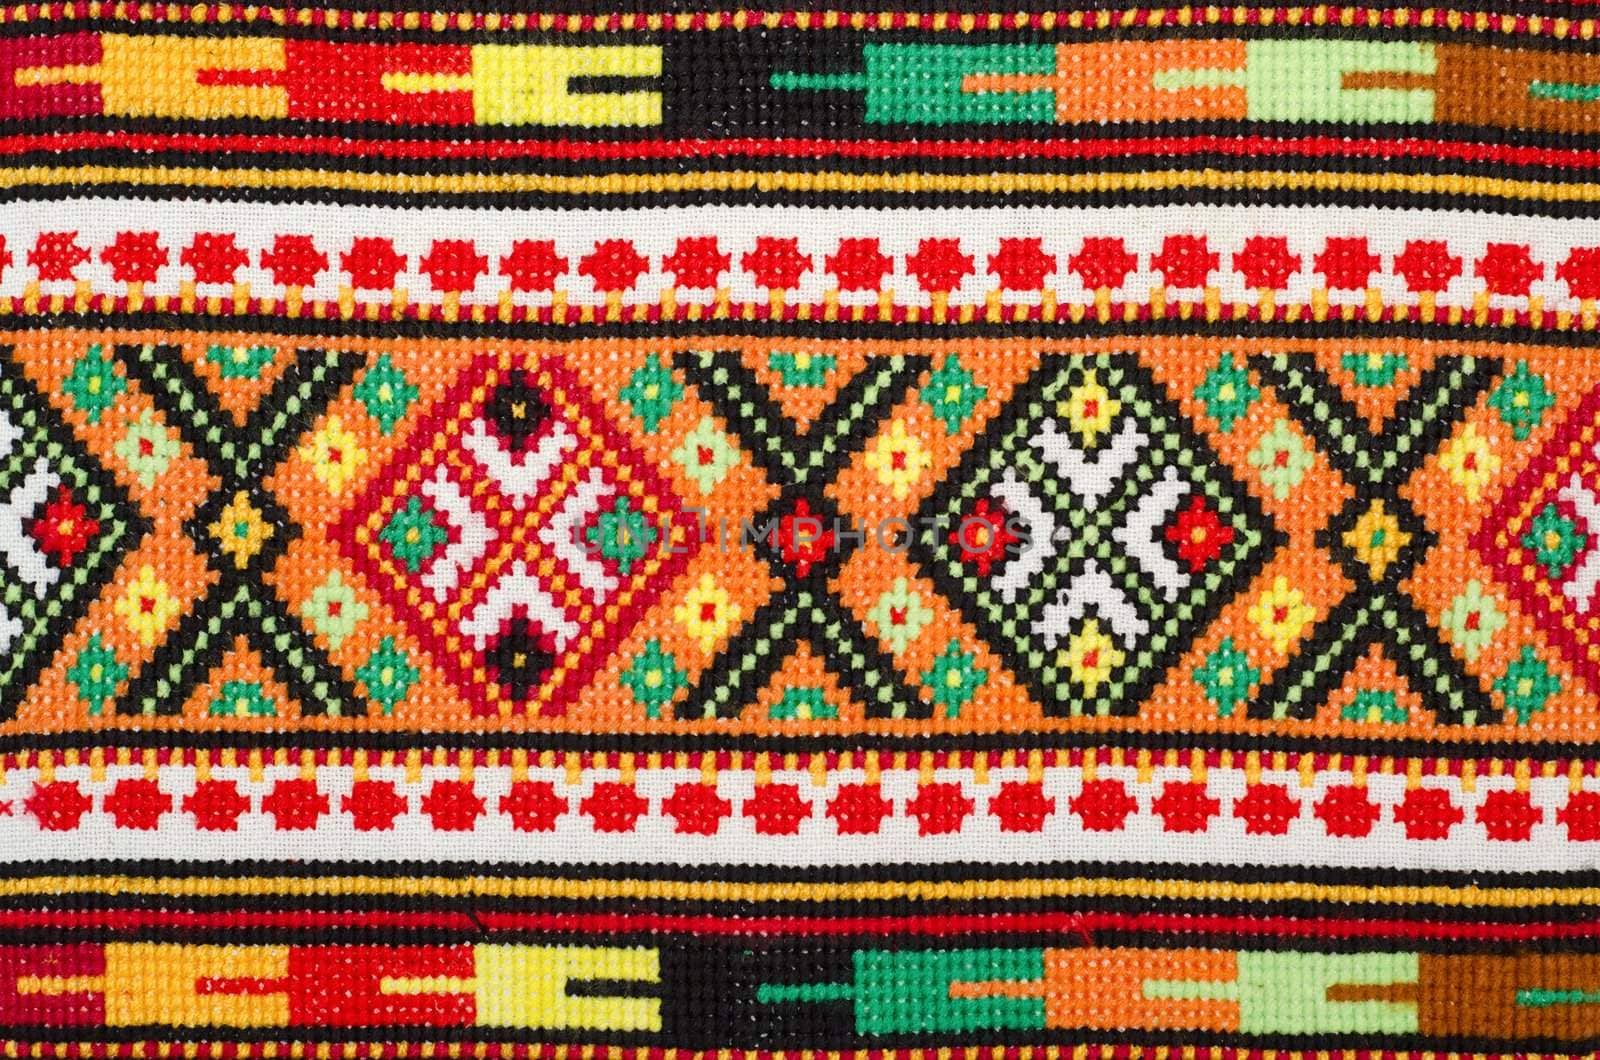 embroidered good by cross-stitch pattern. ukrainian ethnic ornament